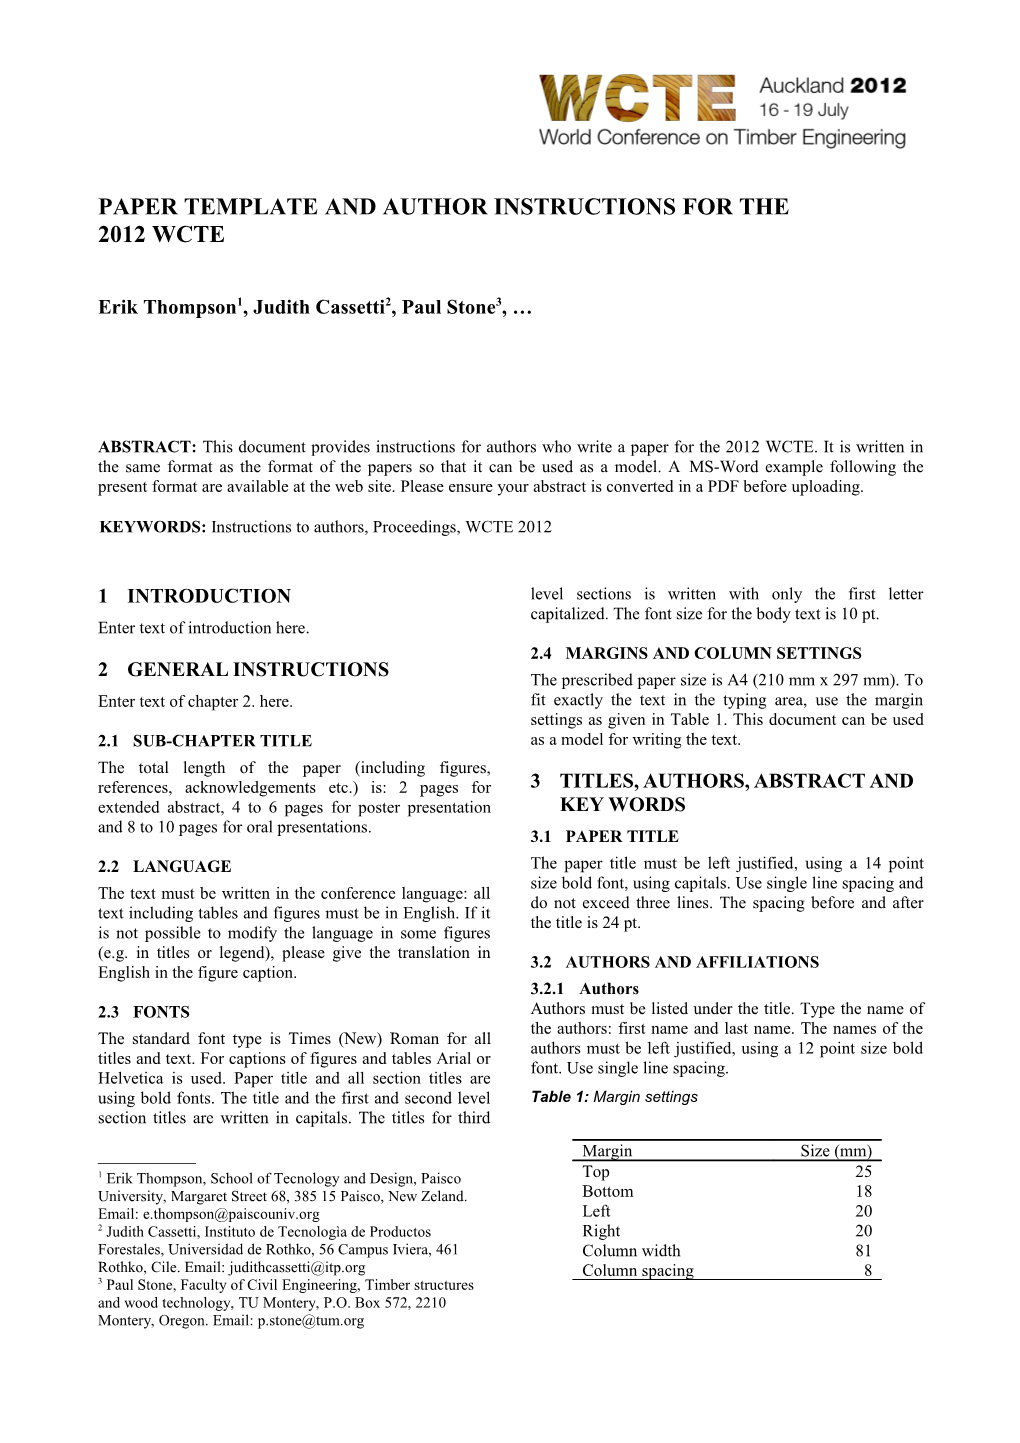 Paper Template and Author Instructions for the 2012 Wcte